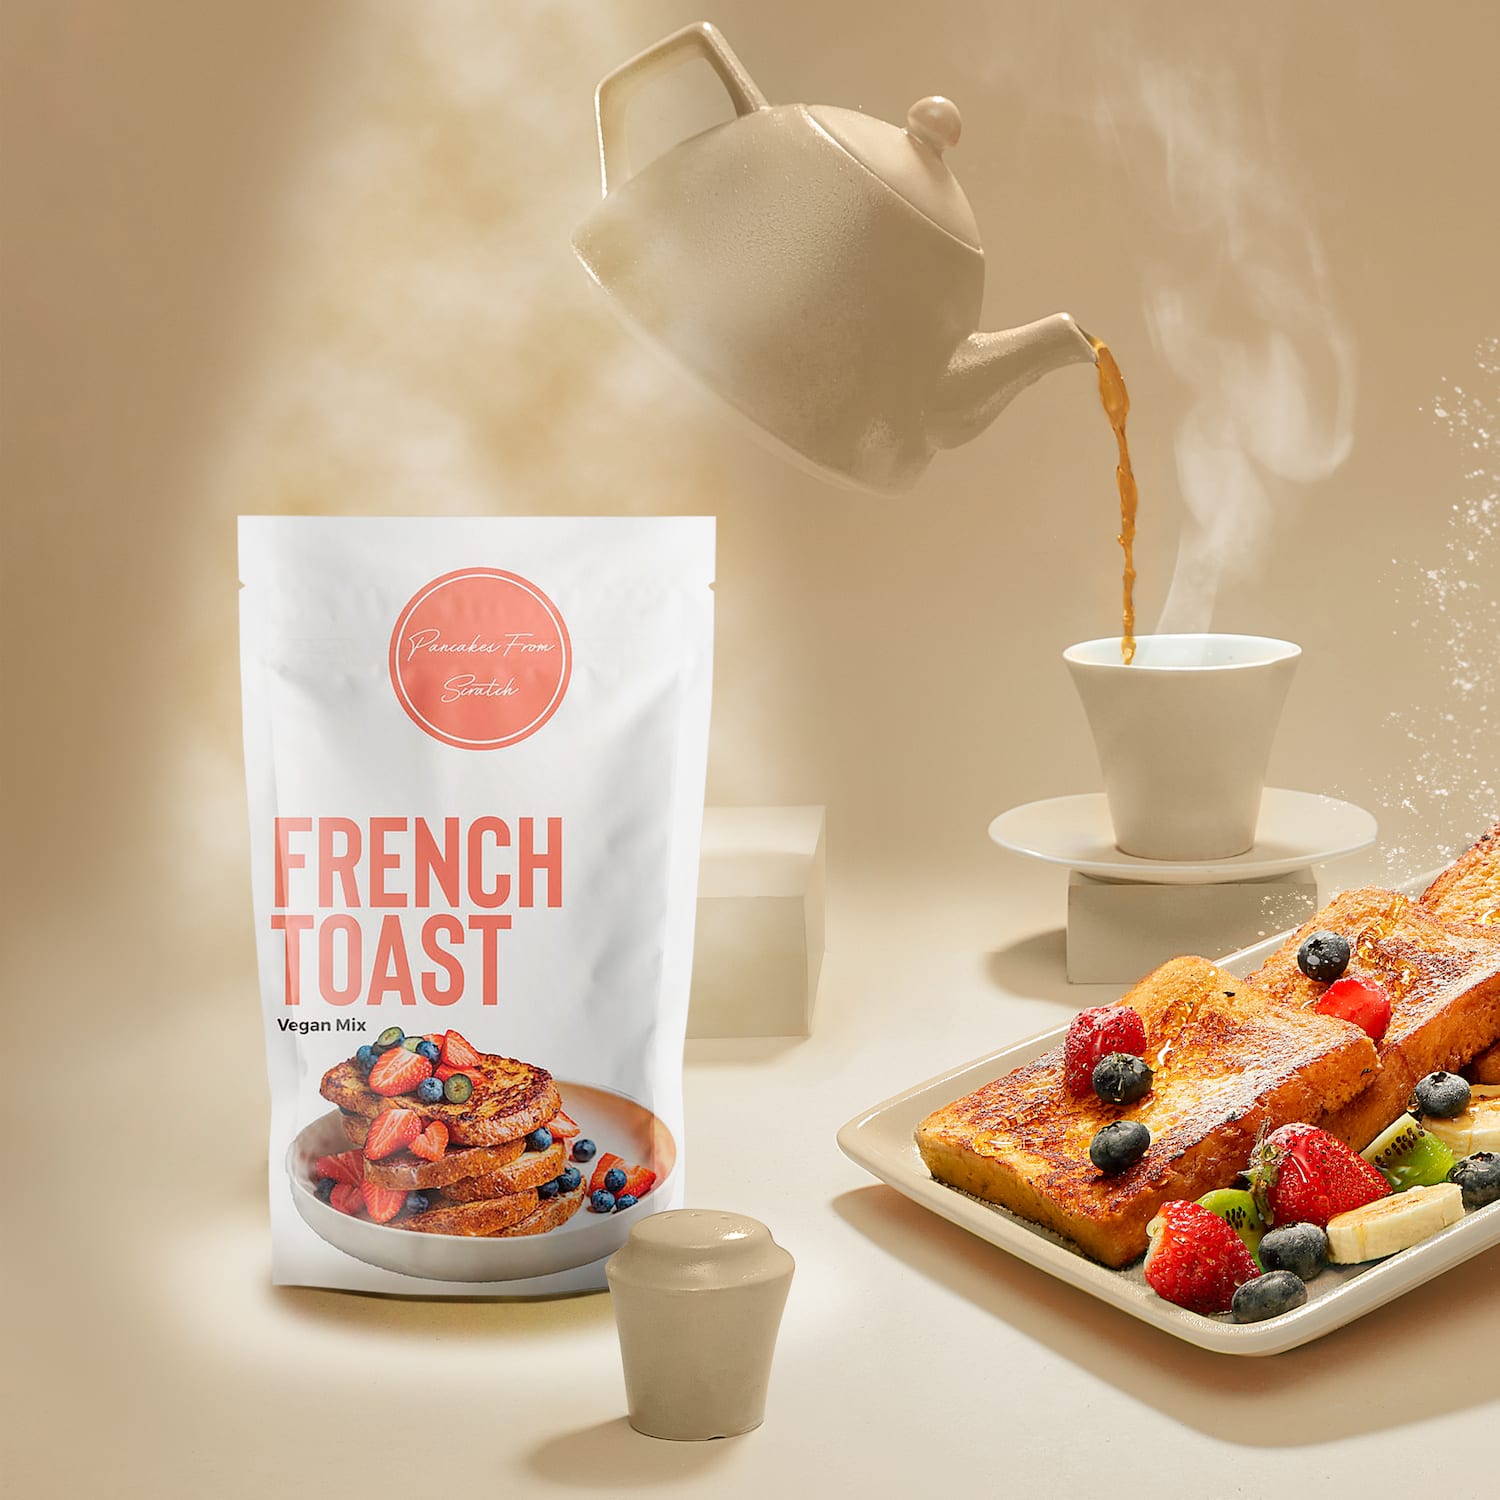 Breakfast Bundle: Pancake Mix and French Toast Mix - The Shade Room Shop